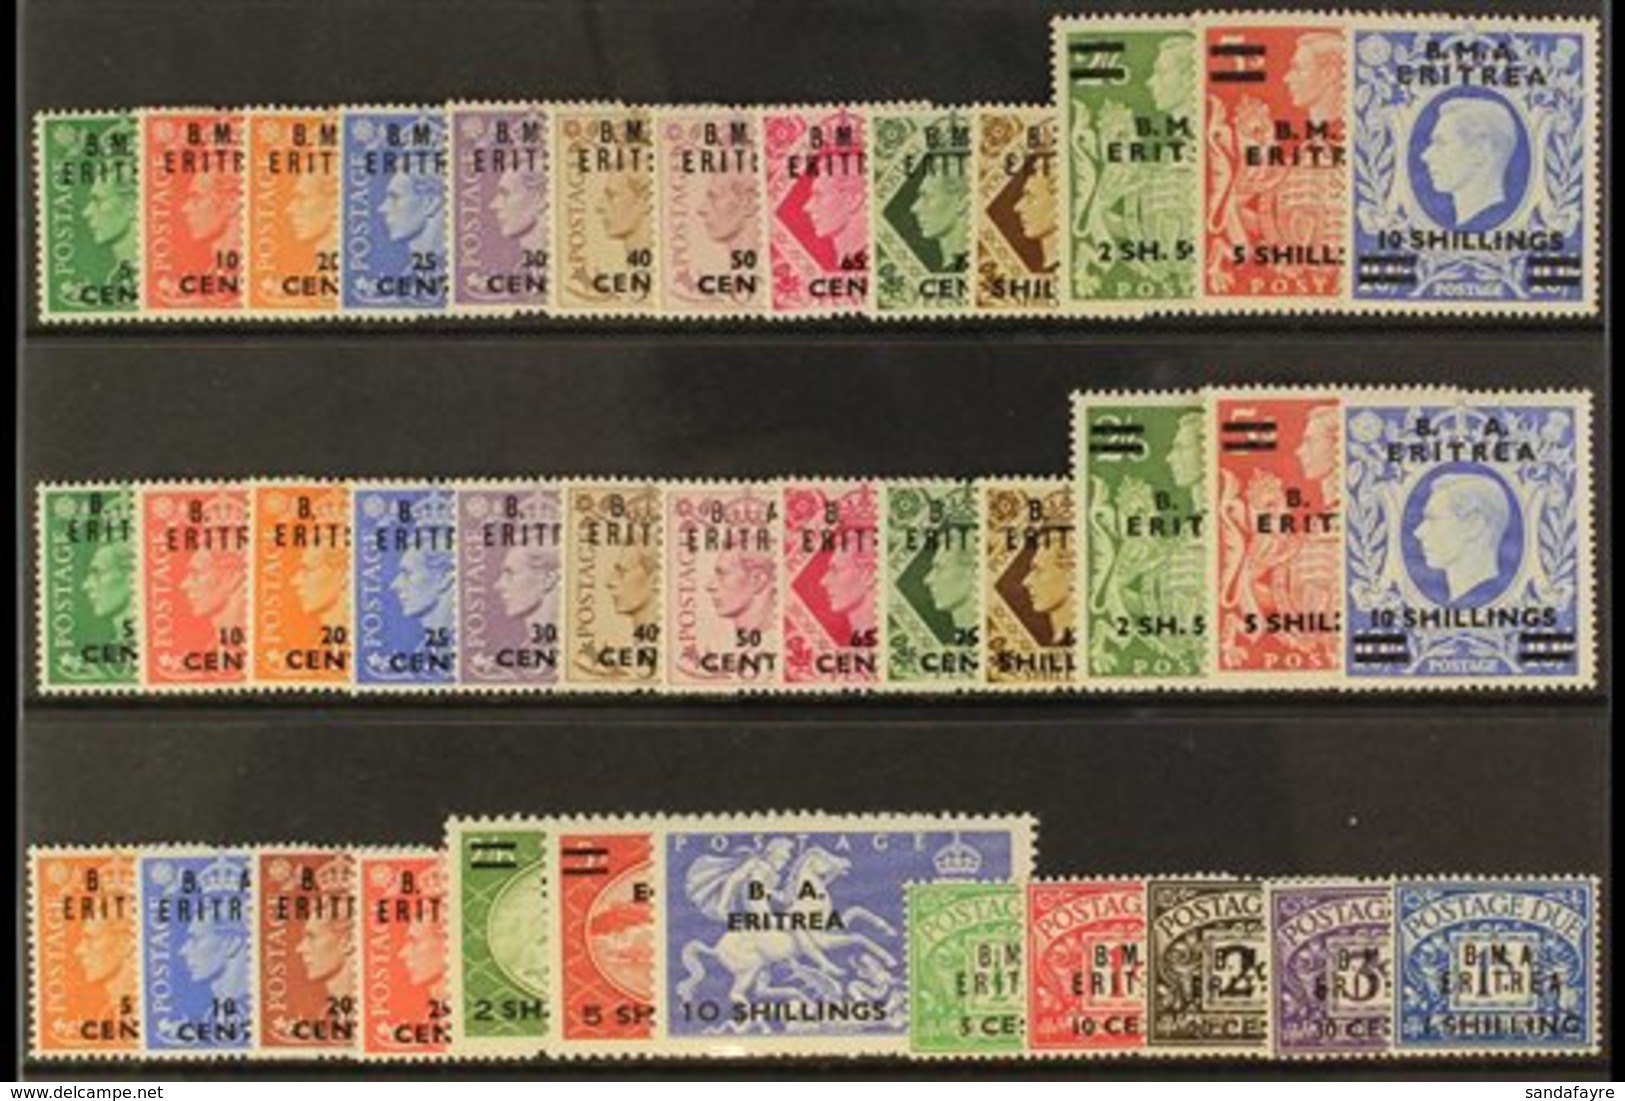 ERITREA  1948-51 MINT COLLECTION Of Complete Sets On A Stock Card, Inc 1948-49 Set, 1950 Set, 1951 Set & 1948 Dues Set.  - Italian Eastern Africa